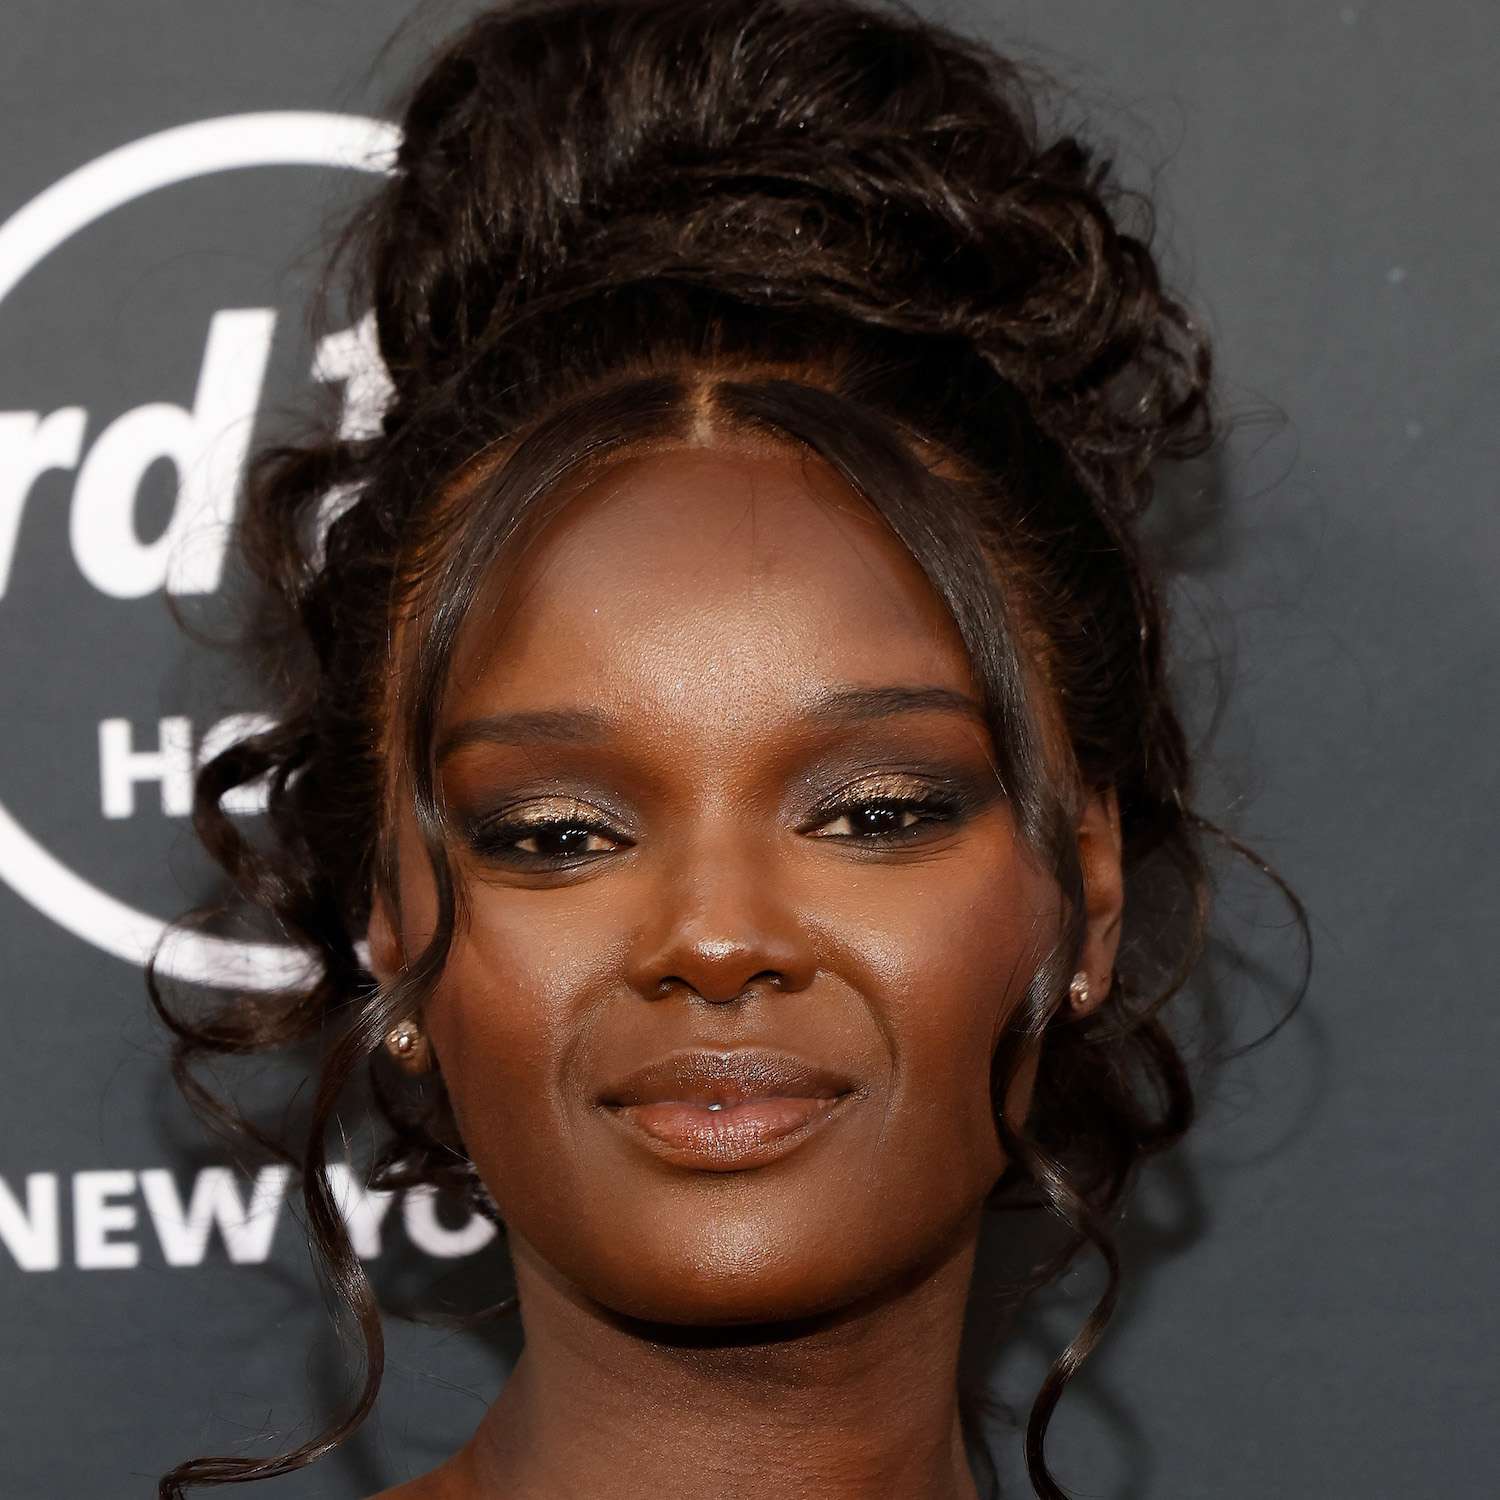 Duckie Thot wears a curly high bun updo hairstyle with face-framing tendrils